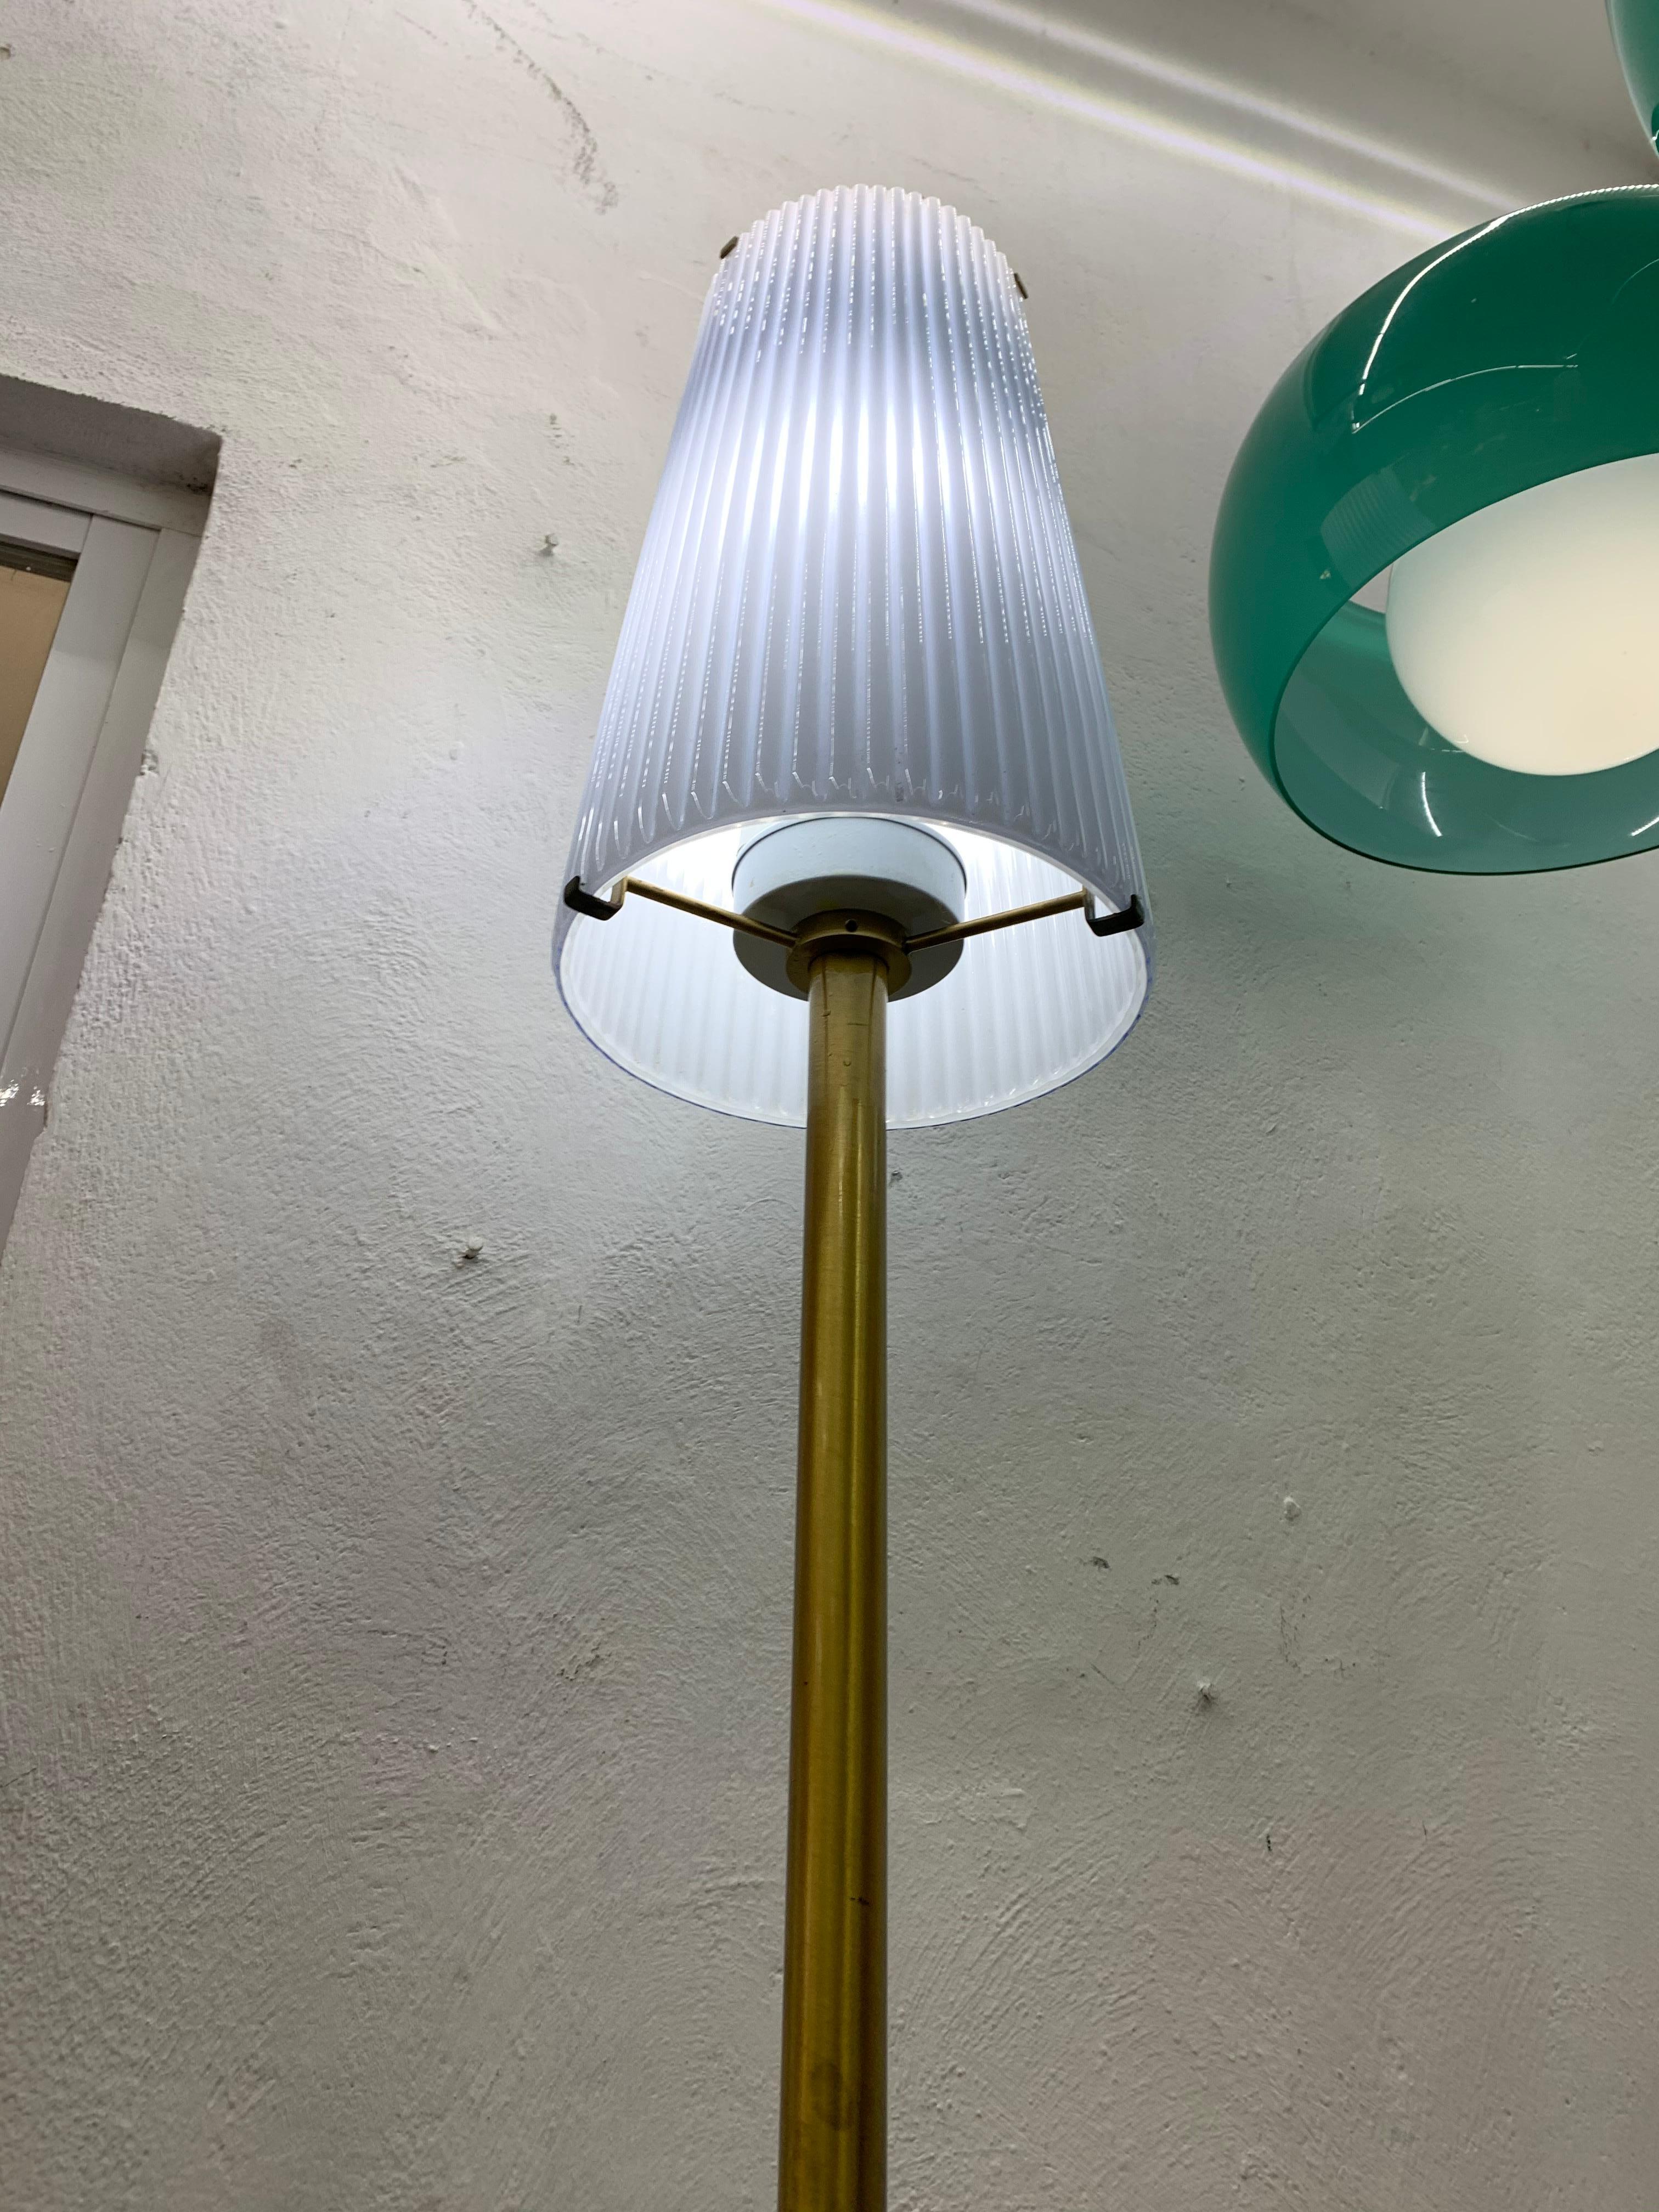 4-light floor lamp designed by Aureliano Toso executed in hand blown Murano glass.
It still has the original label attached.
Measurements:
177 cm high total
31 cm wide at the base

Glass shade measurements:
39 cm high by 23 cm wide.
 